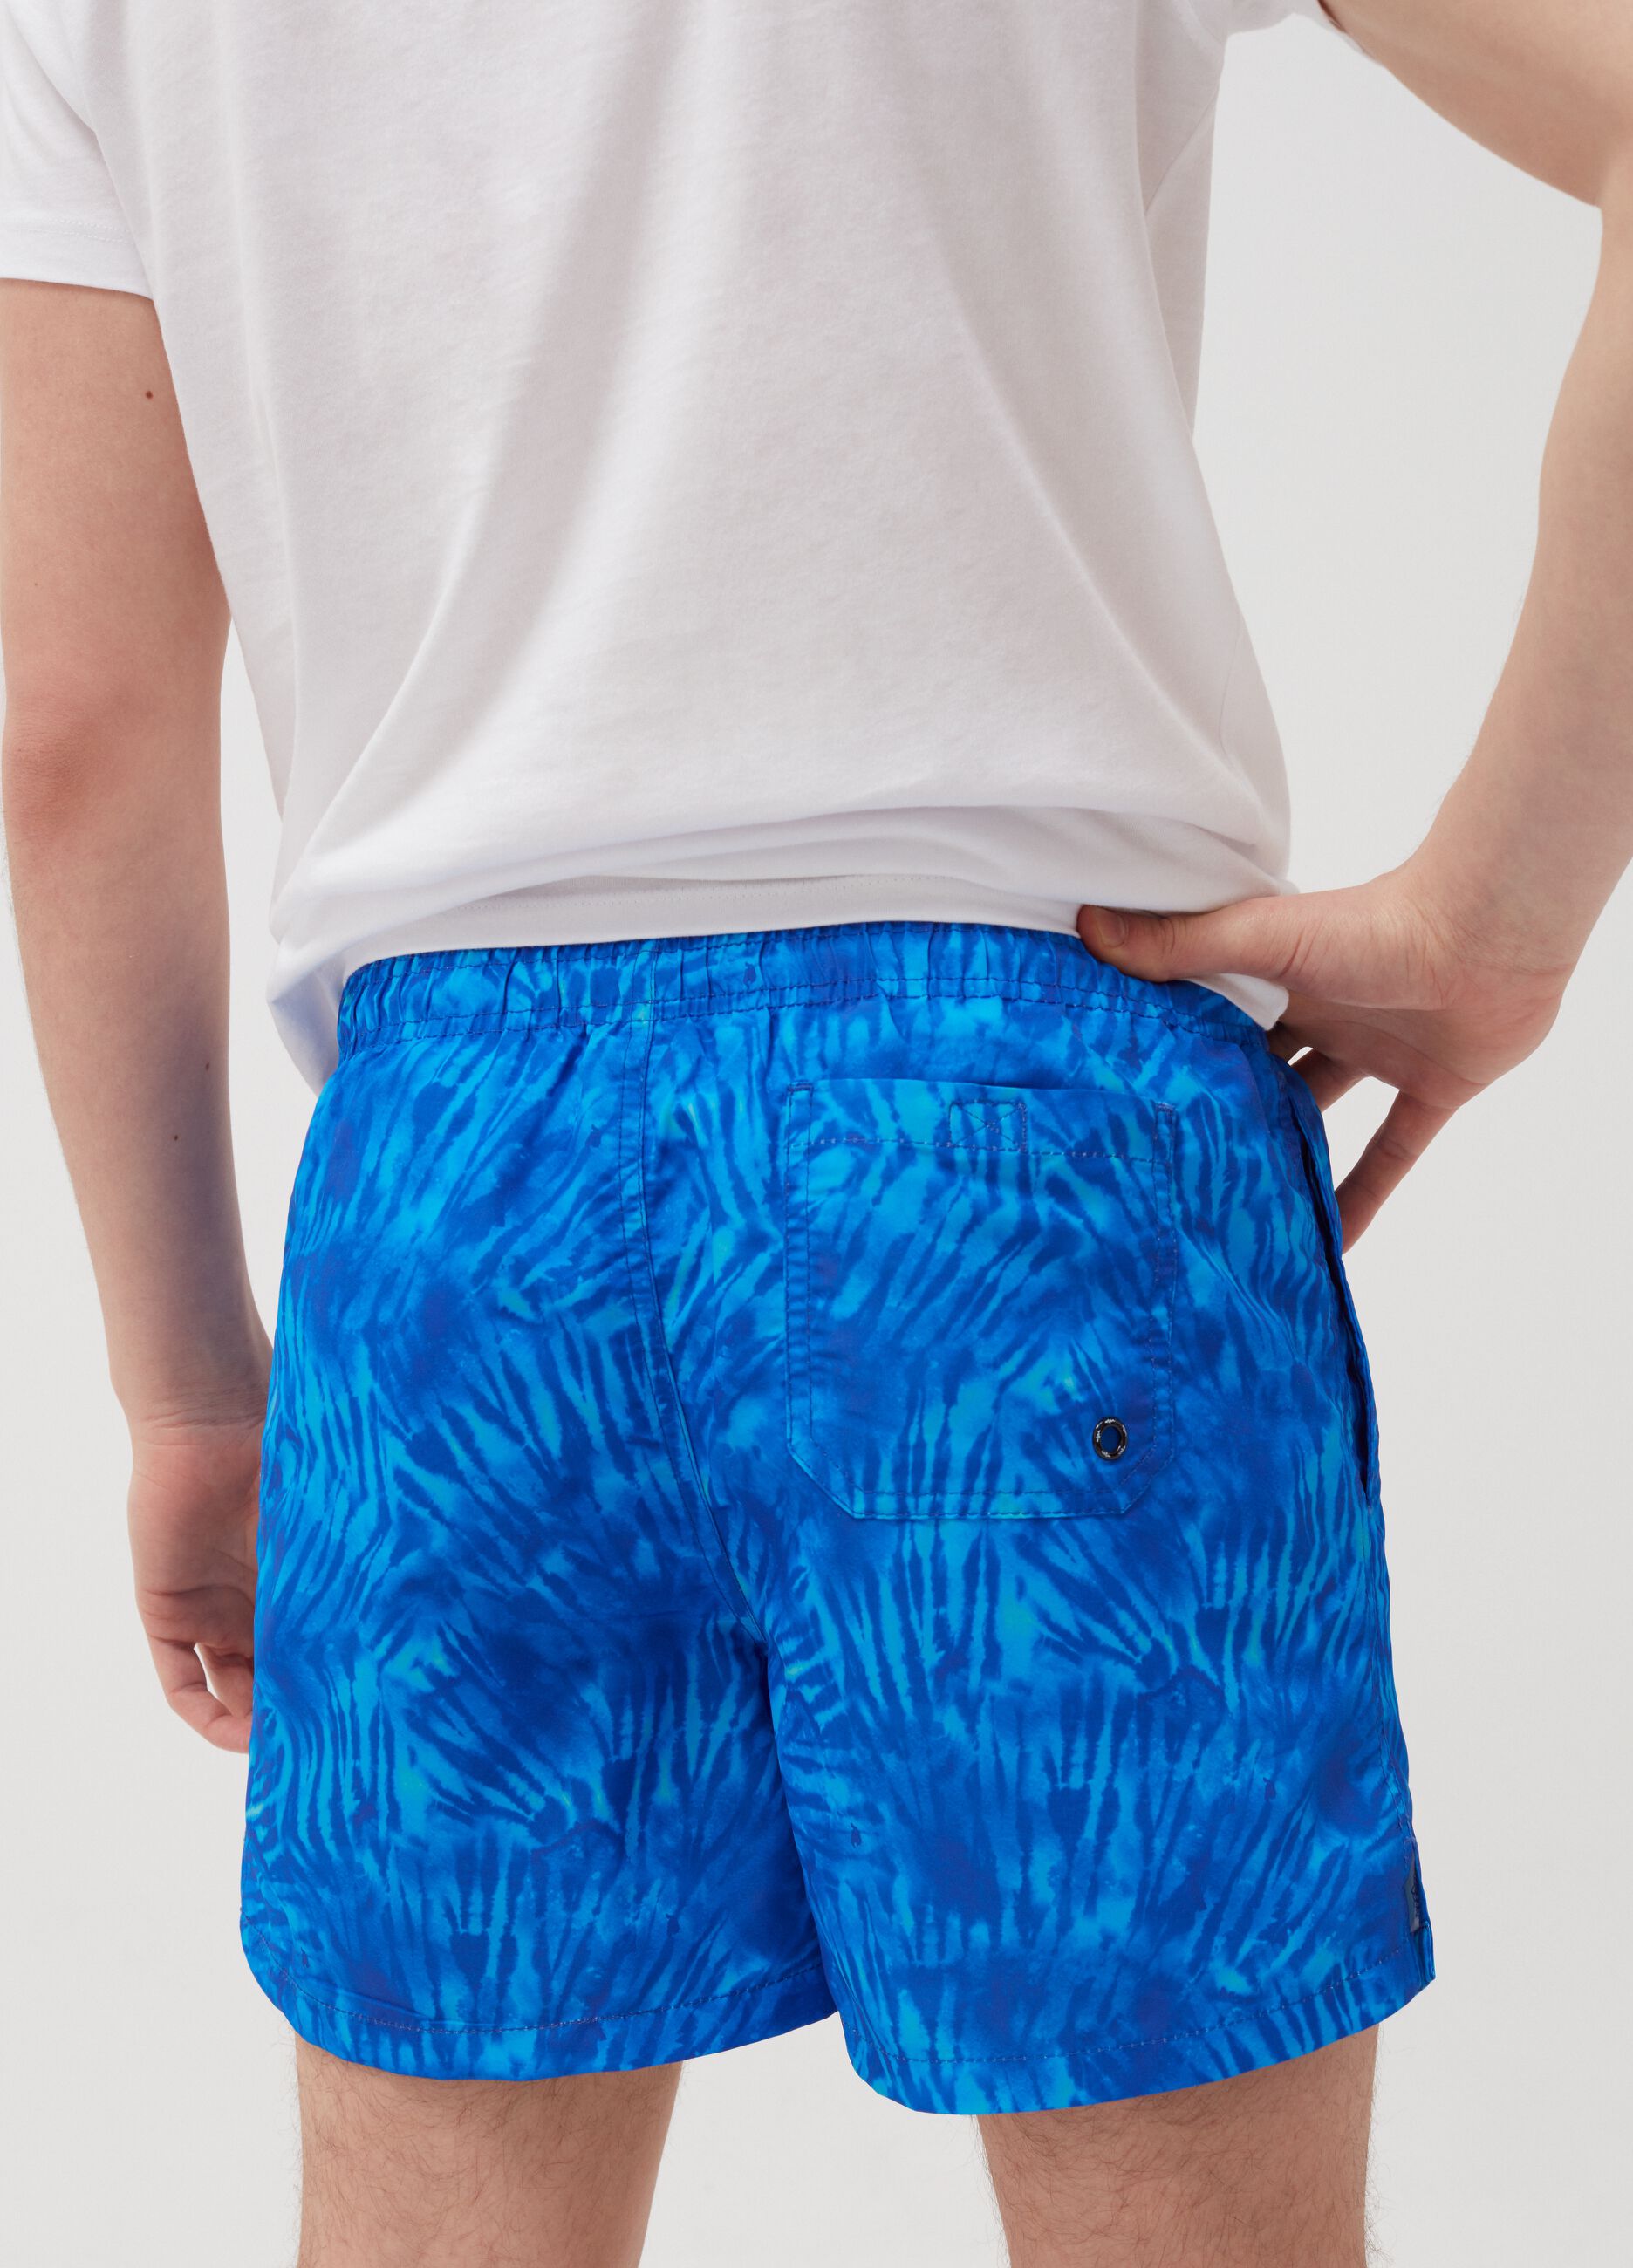 Swimming trunks with Maui and Sons pattern